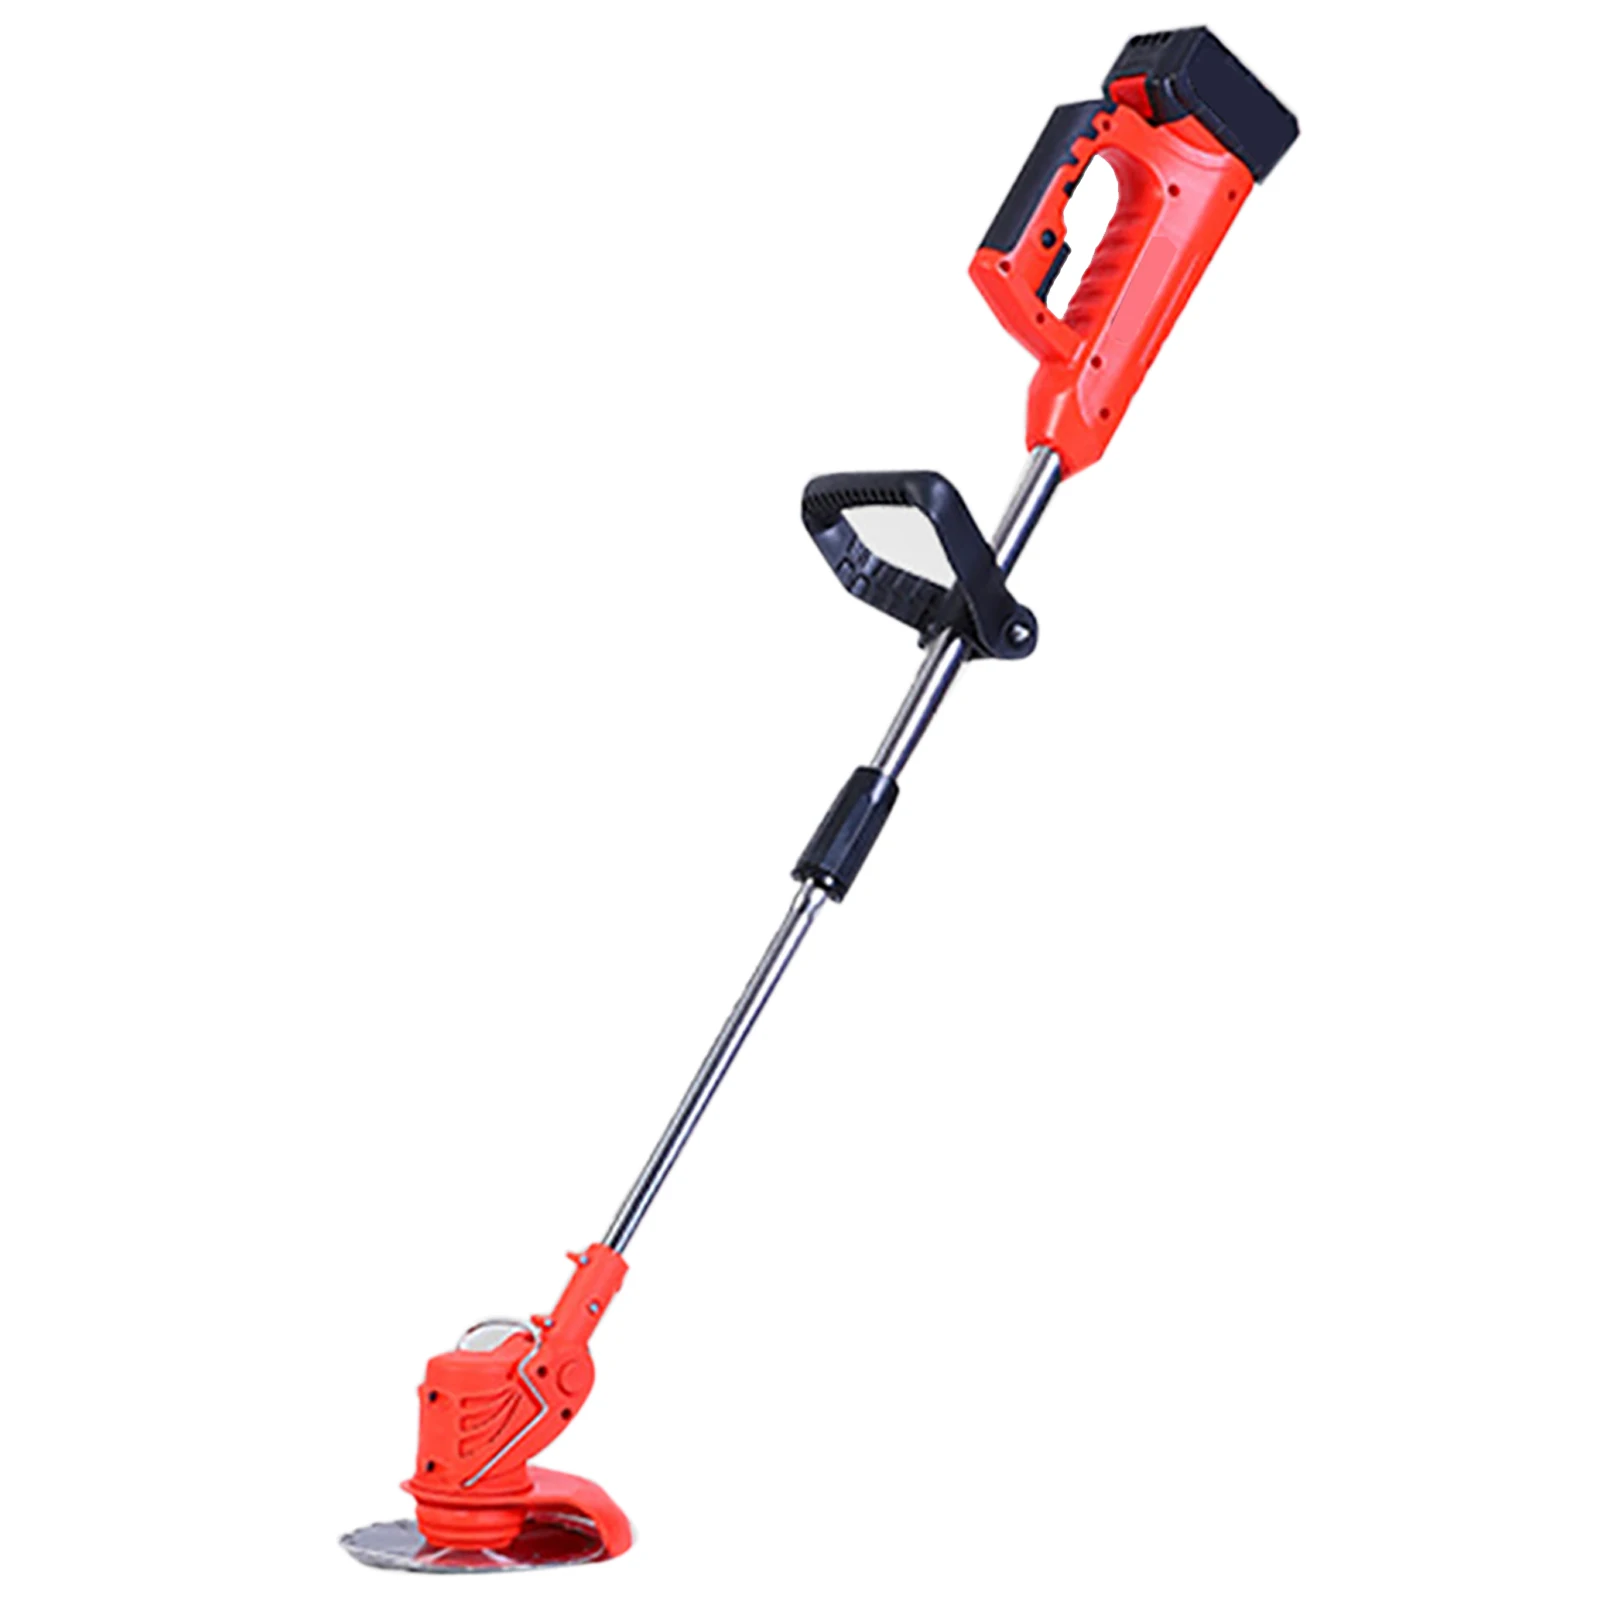 21V Cordless Electric Grass Trimmer Portable Lawn Mower Weeds Brush Length Adjustable Cutter Garden Pruning Tool with 2 Battery